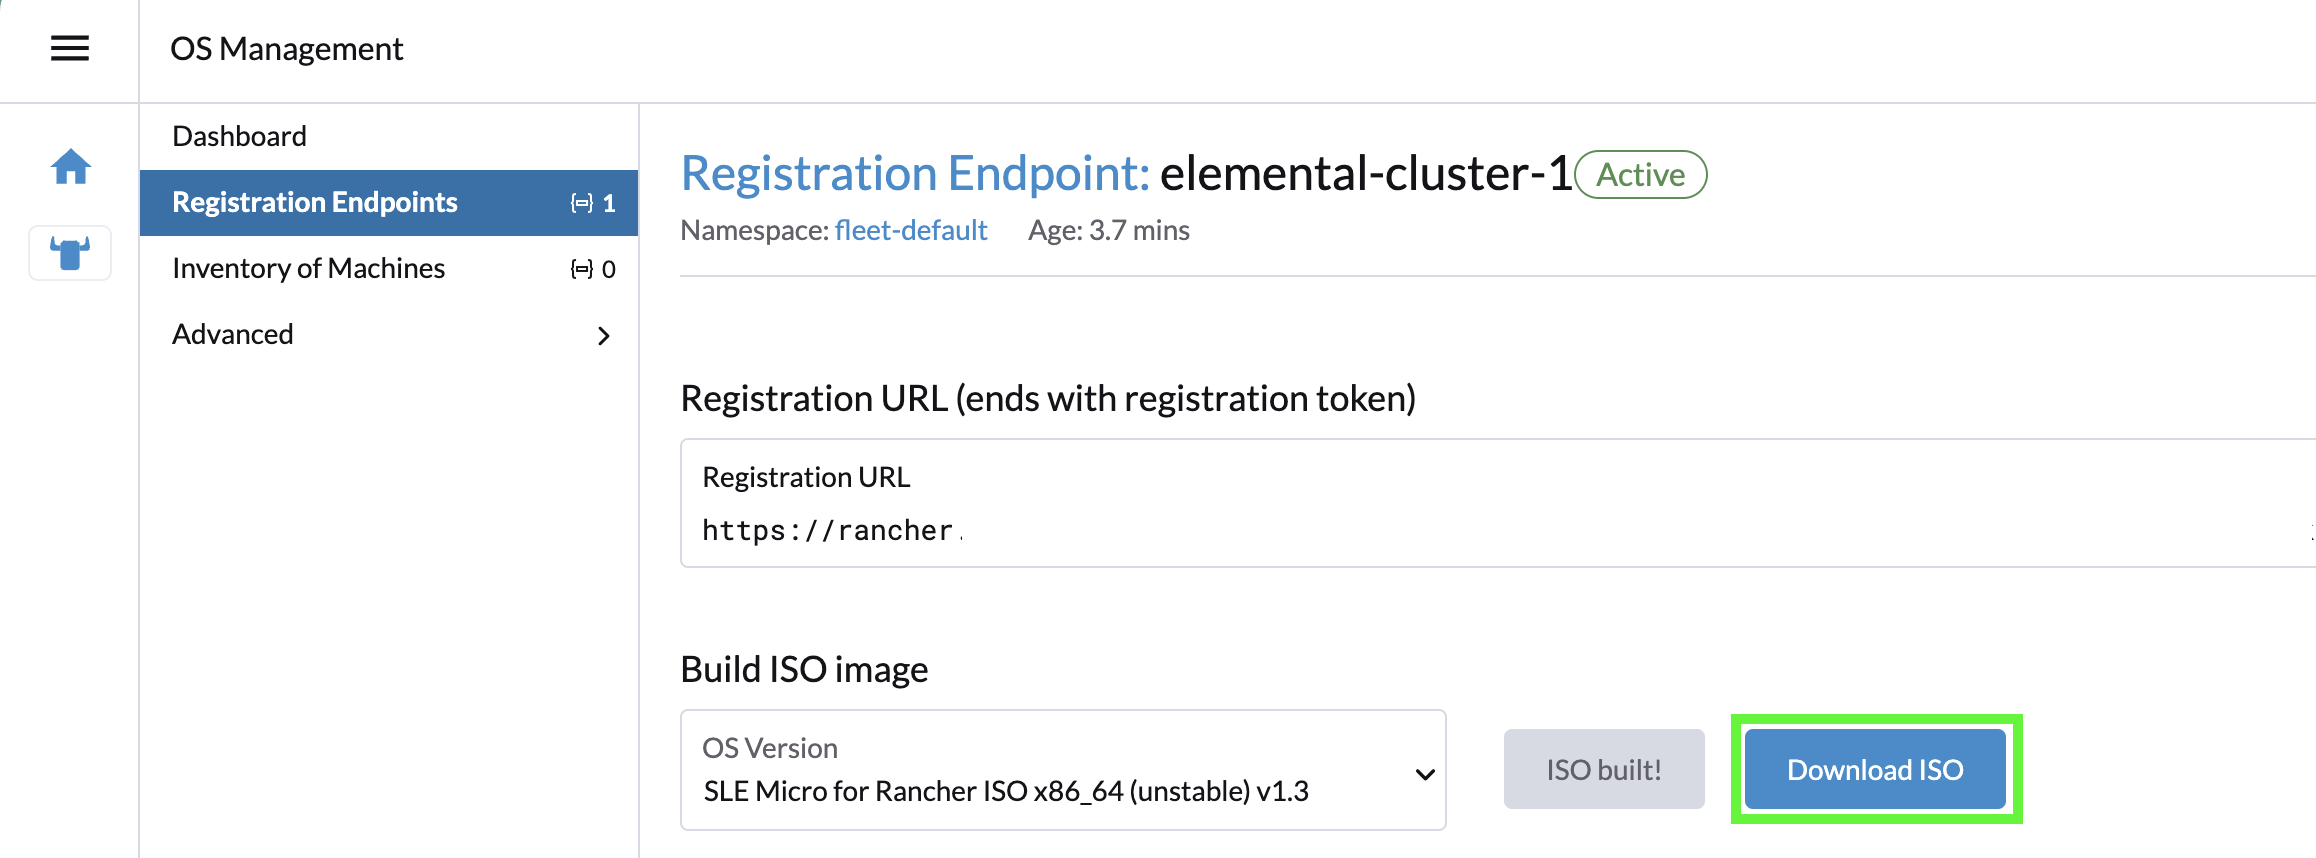 Download ISO in Registration Endpoints